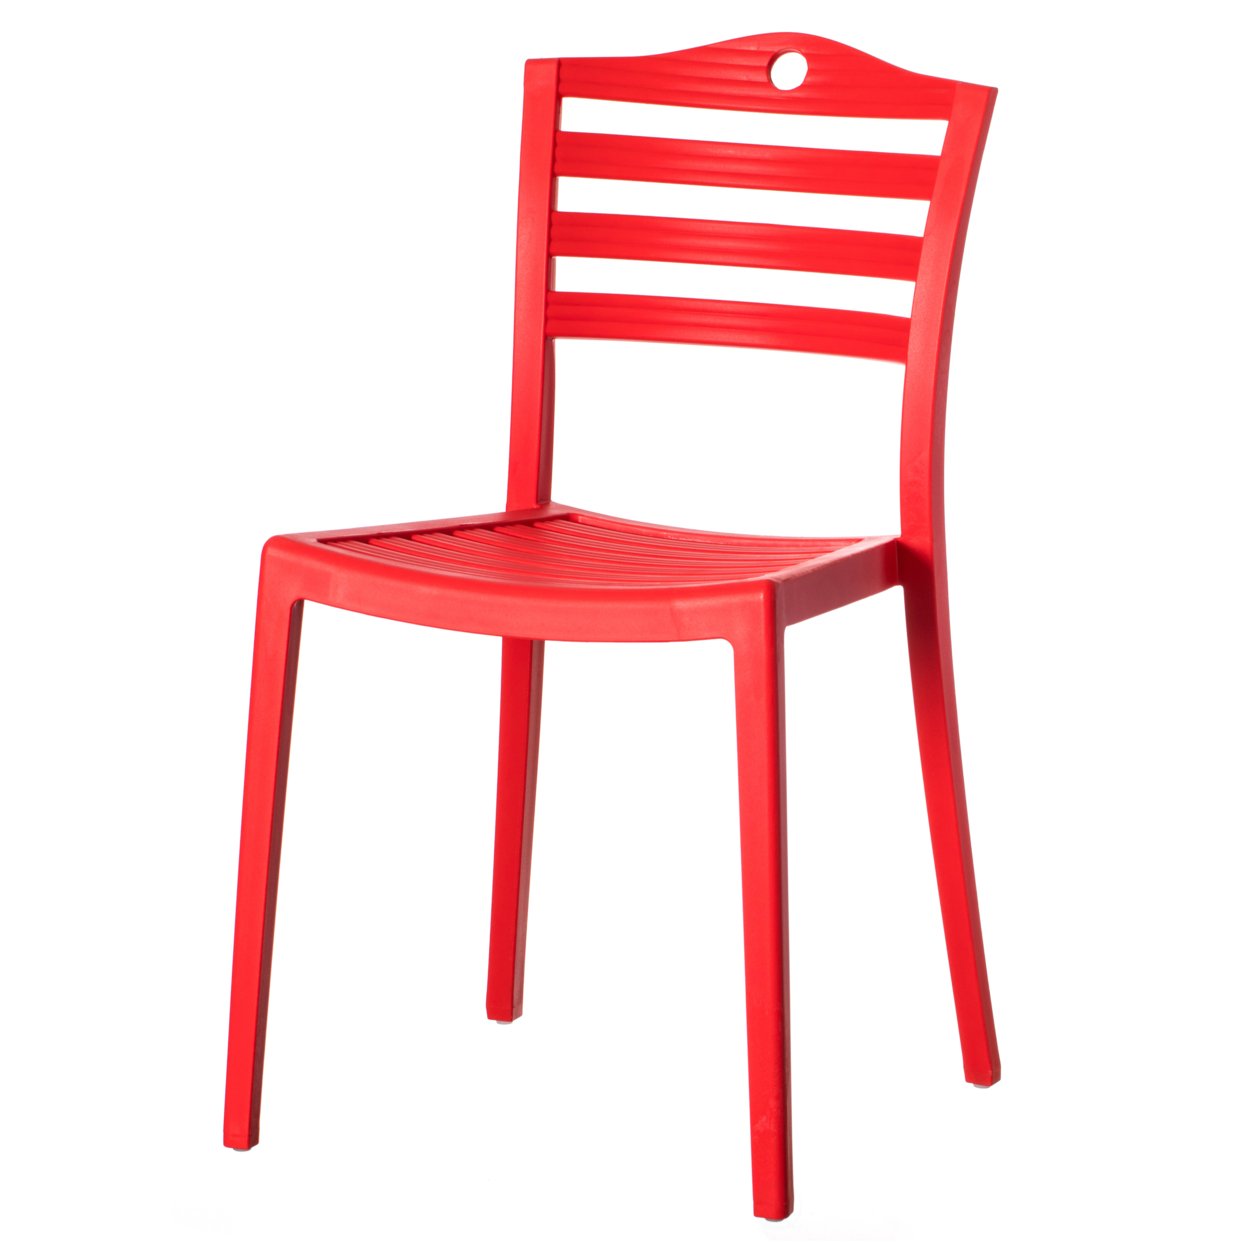 Stackable Modern Plastic Indoor And Outdoor Dining Chair With Ladderback Design For All Weather Use - Single Red